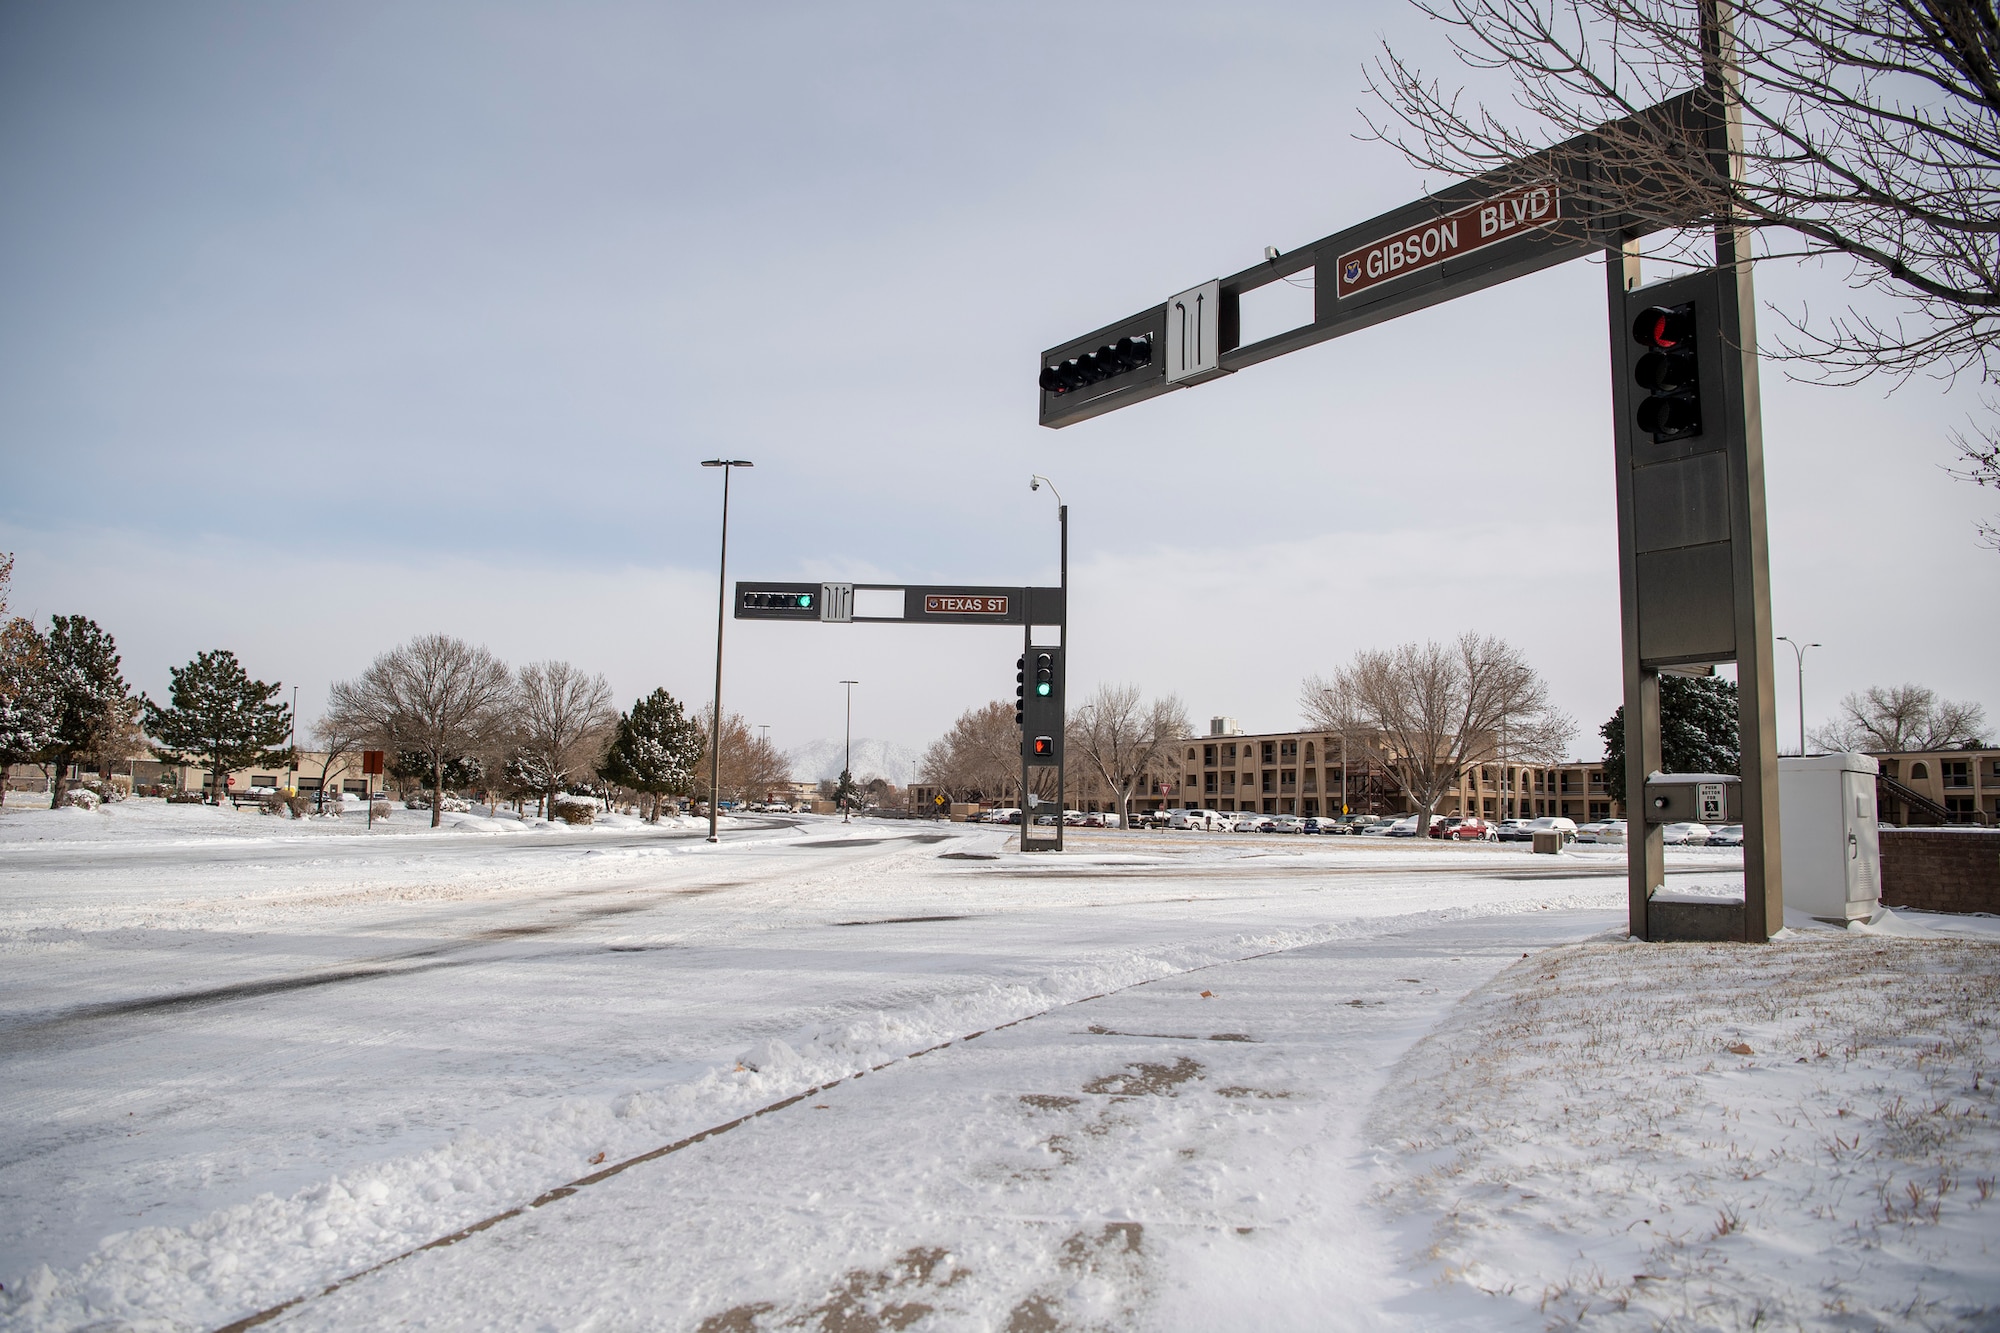 A view of the intersection of Gibson and Texas covered in snow after a winter blizzard hit Dec. 27, 2018. A blizzard blanketed the Albuquerque area and prompted closure of Kirtland Air Force Base to non-mission essential personnel on Dec. 27, and 28, 2018.